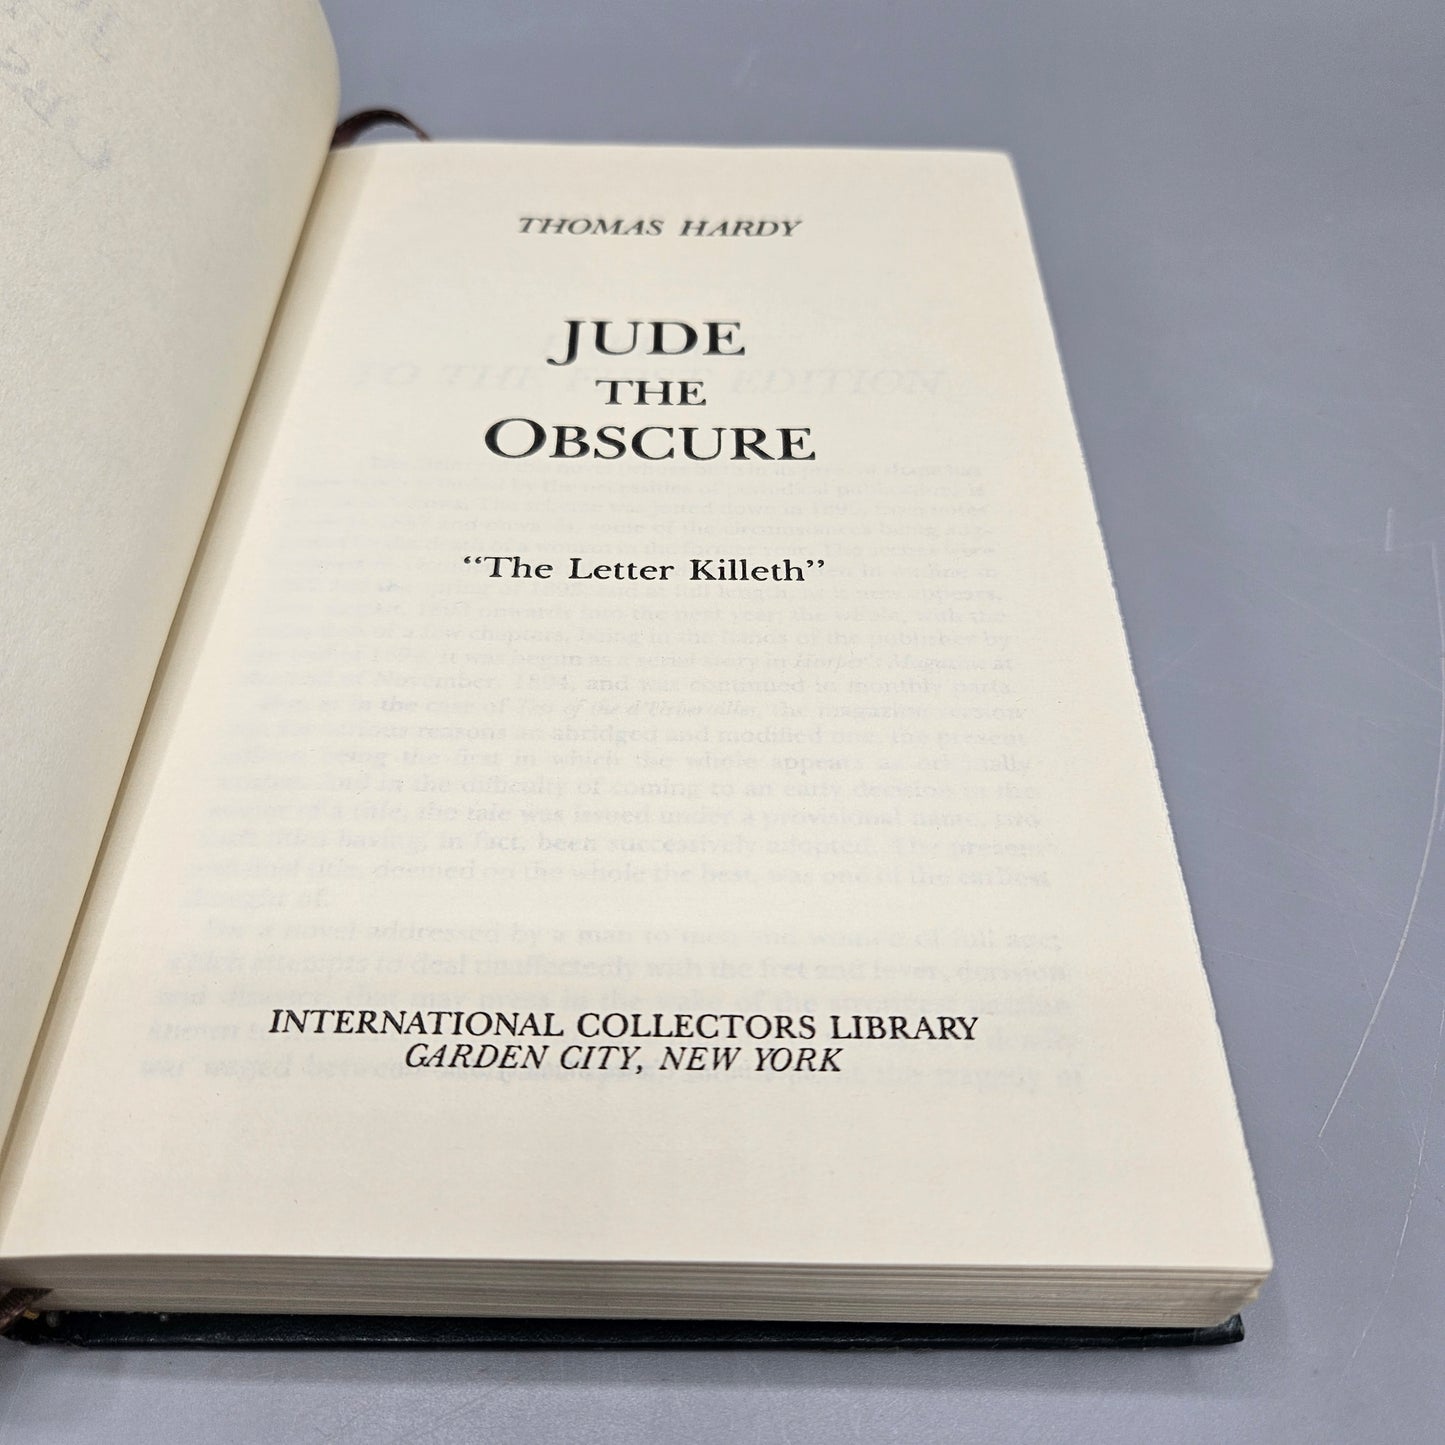 Thomas Hardy "Jude the Obscure" International Collectors Library